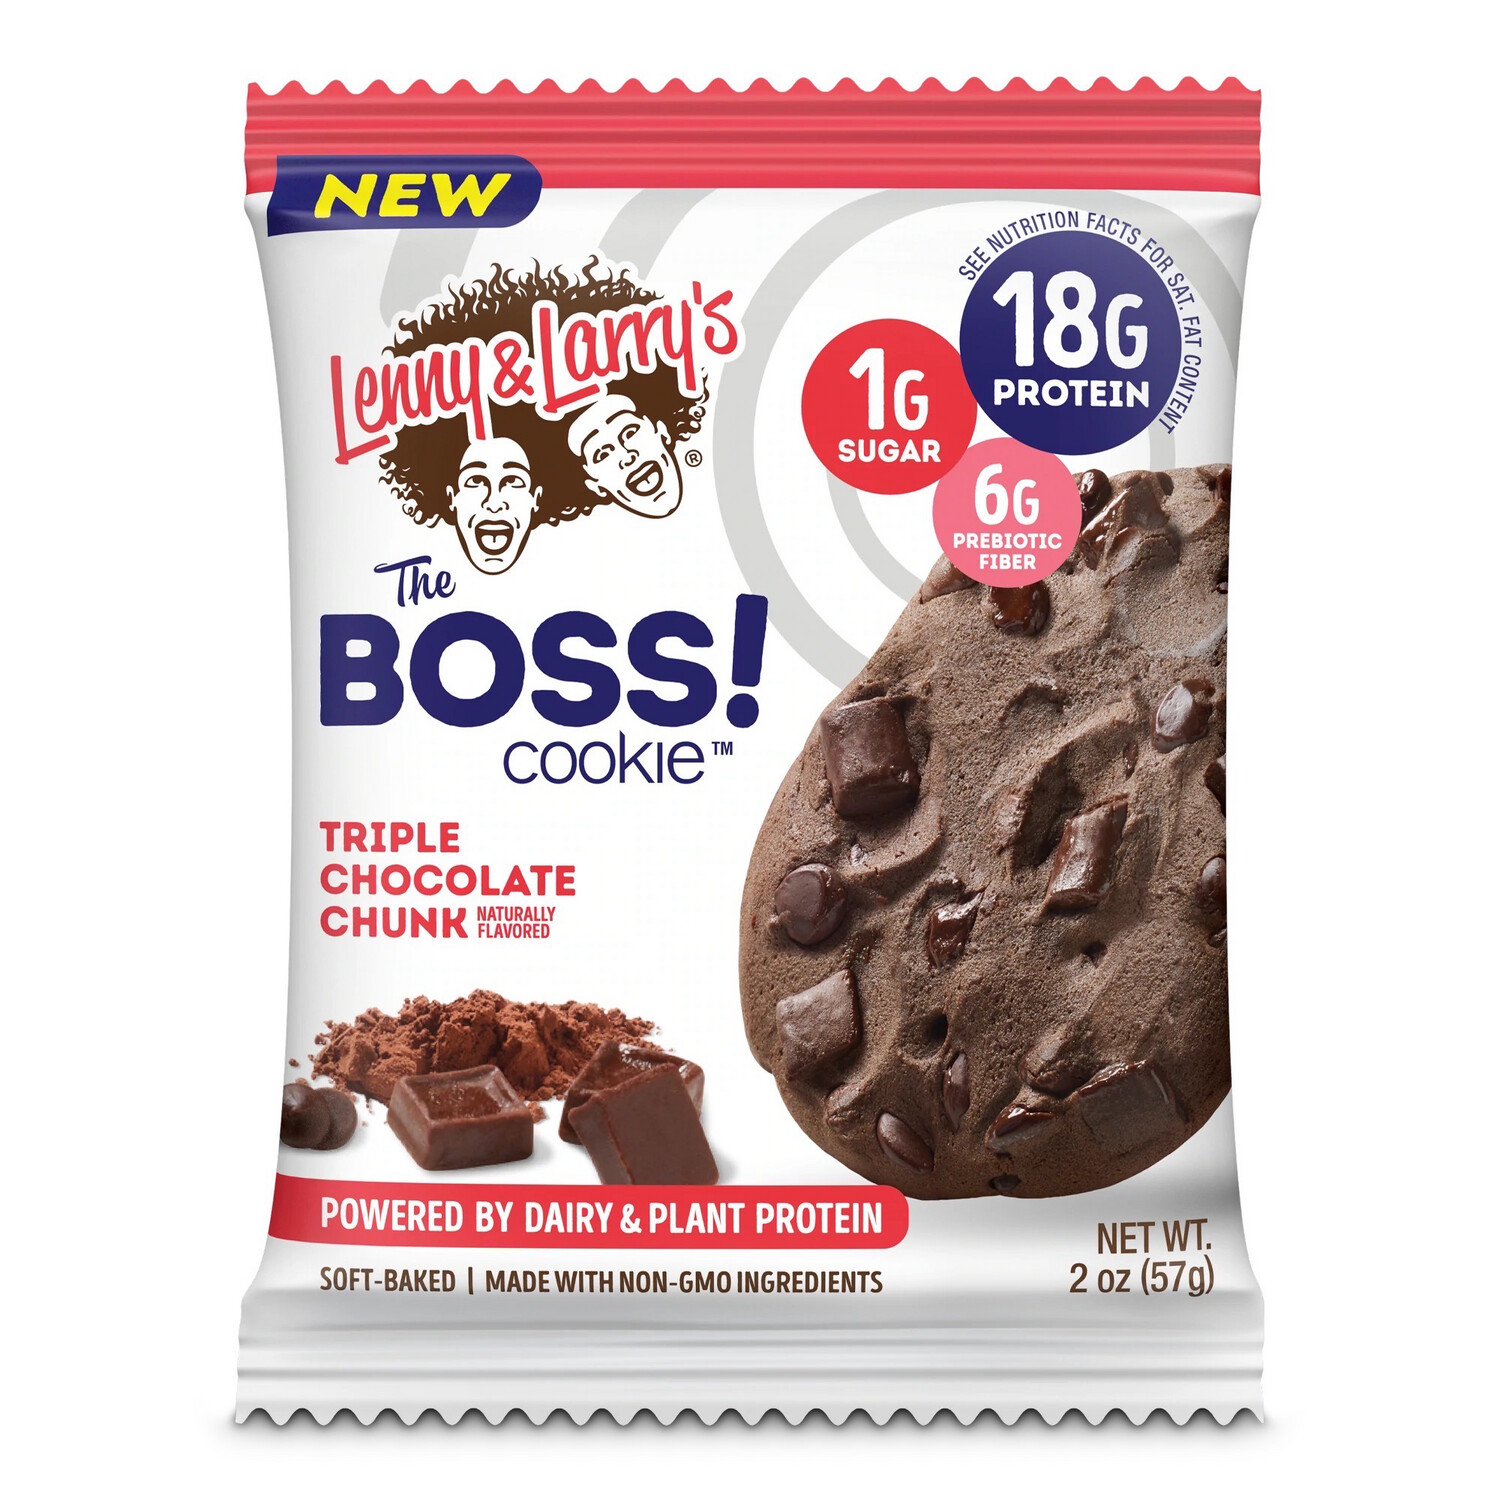 Lenny & Larry’s The Boss Cookie Triple Chocolate Chunk 18g Protein